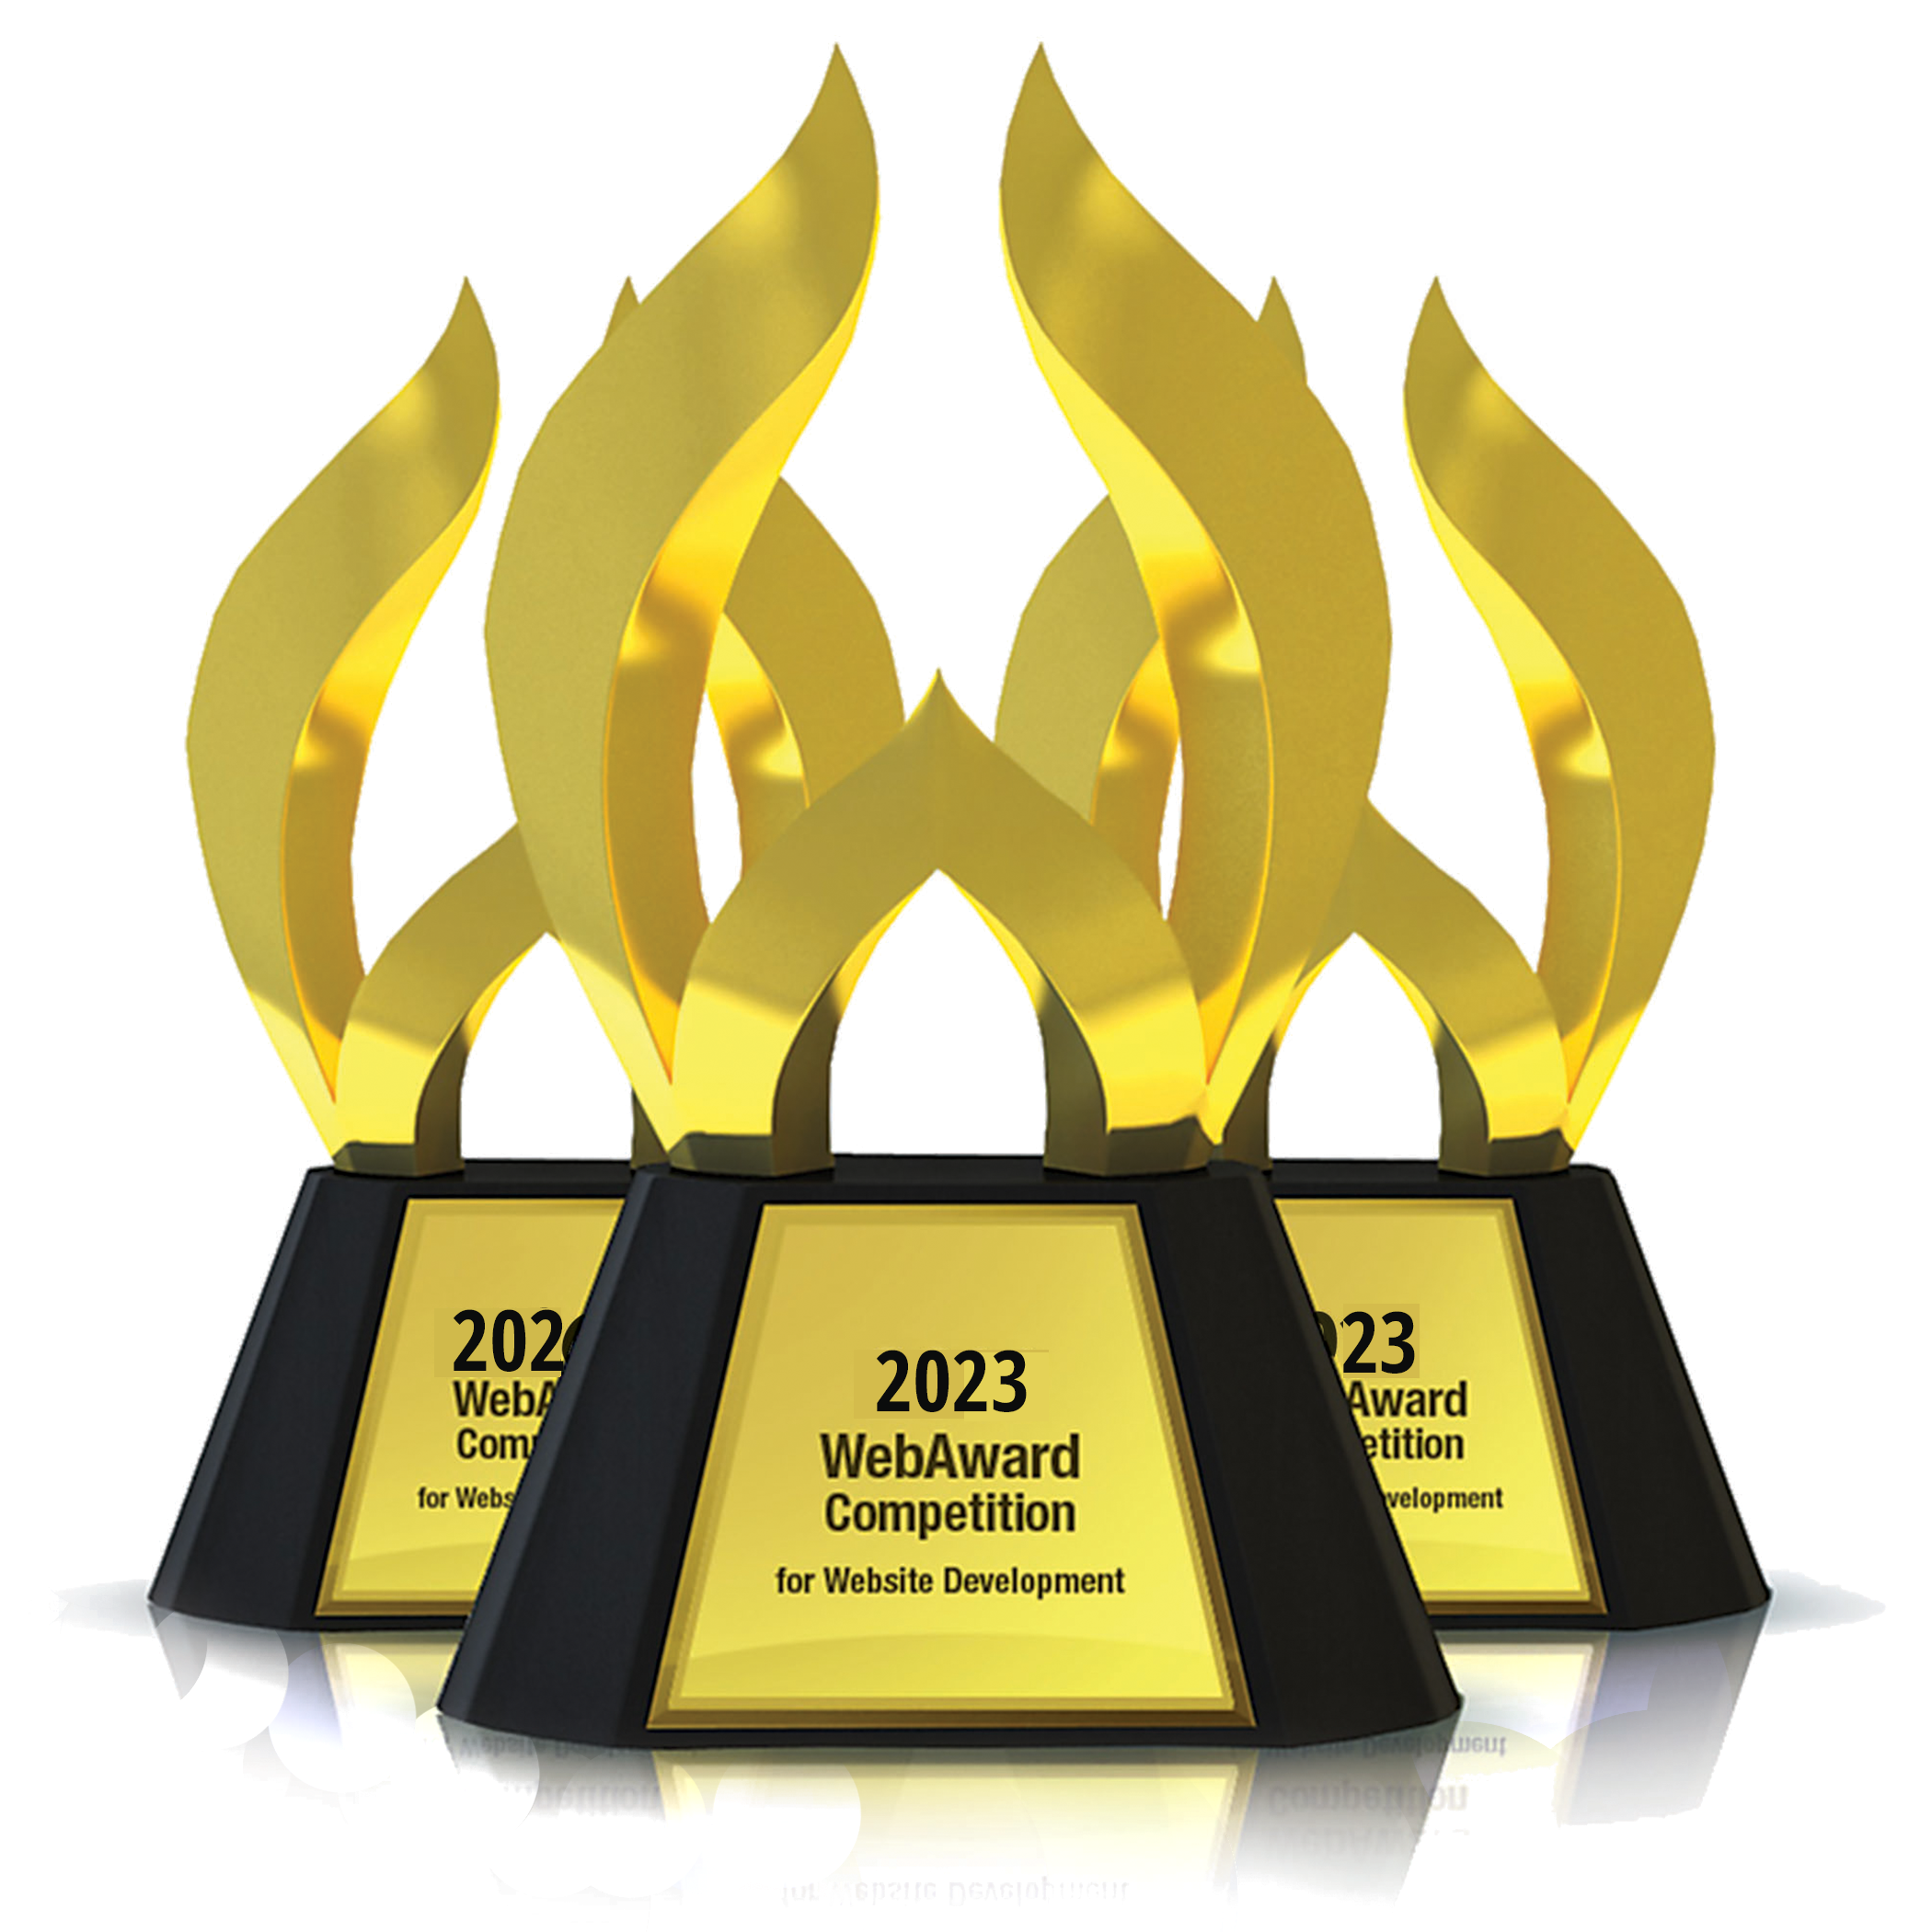 Best Medical Website to be Named by Web Marketing Association in 27th Annual WebAward Competition